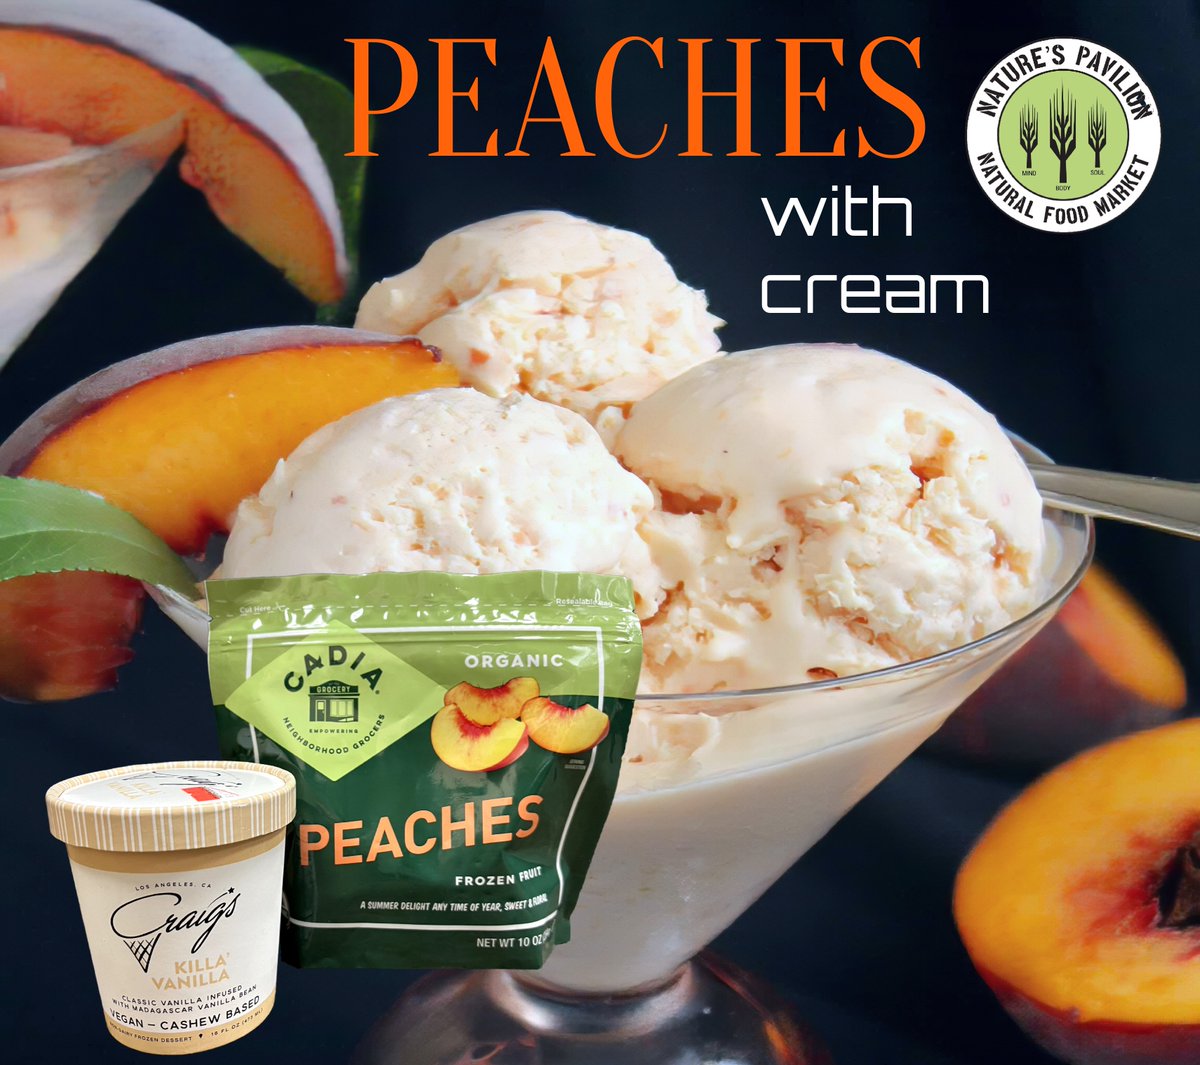 However you like your peaches and cream, you'll find the best organic and natural varieties at Nature's Pavilion! 📷

#naturespavilion #peachesandcream #peachcobblerday